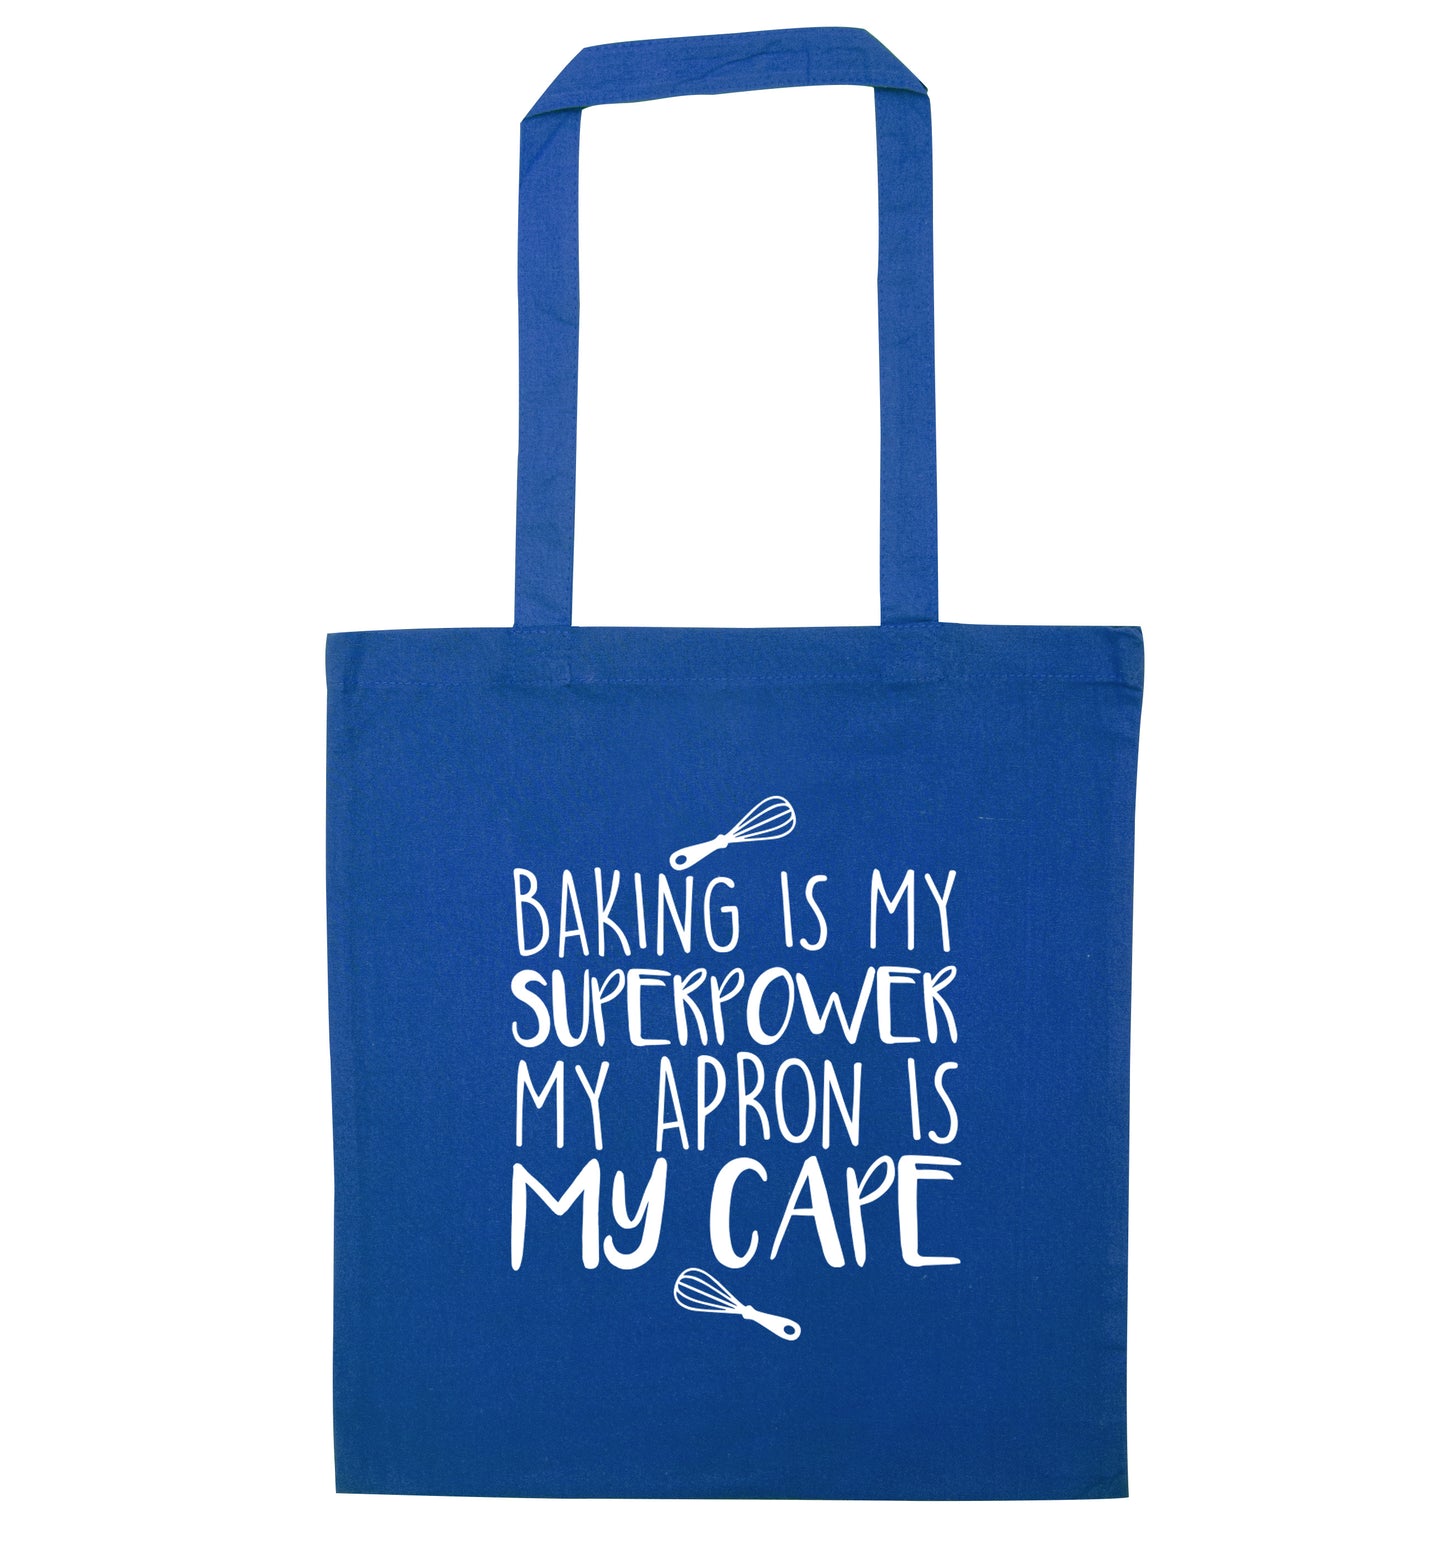 Baking is my superpower my apron is my cape blue tote bag